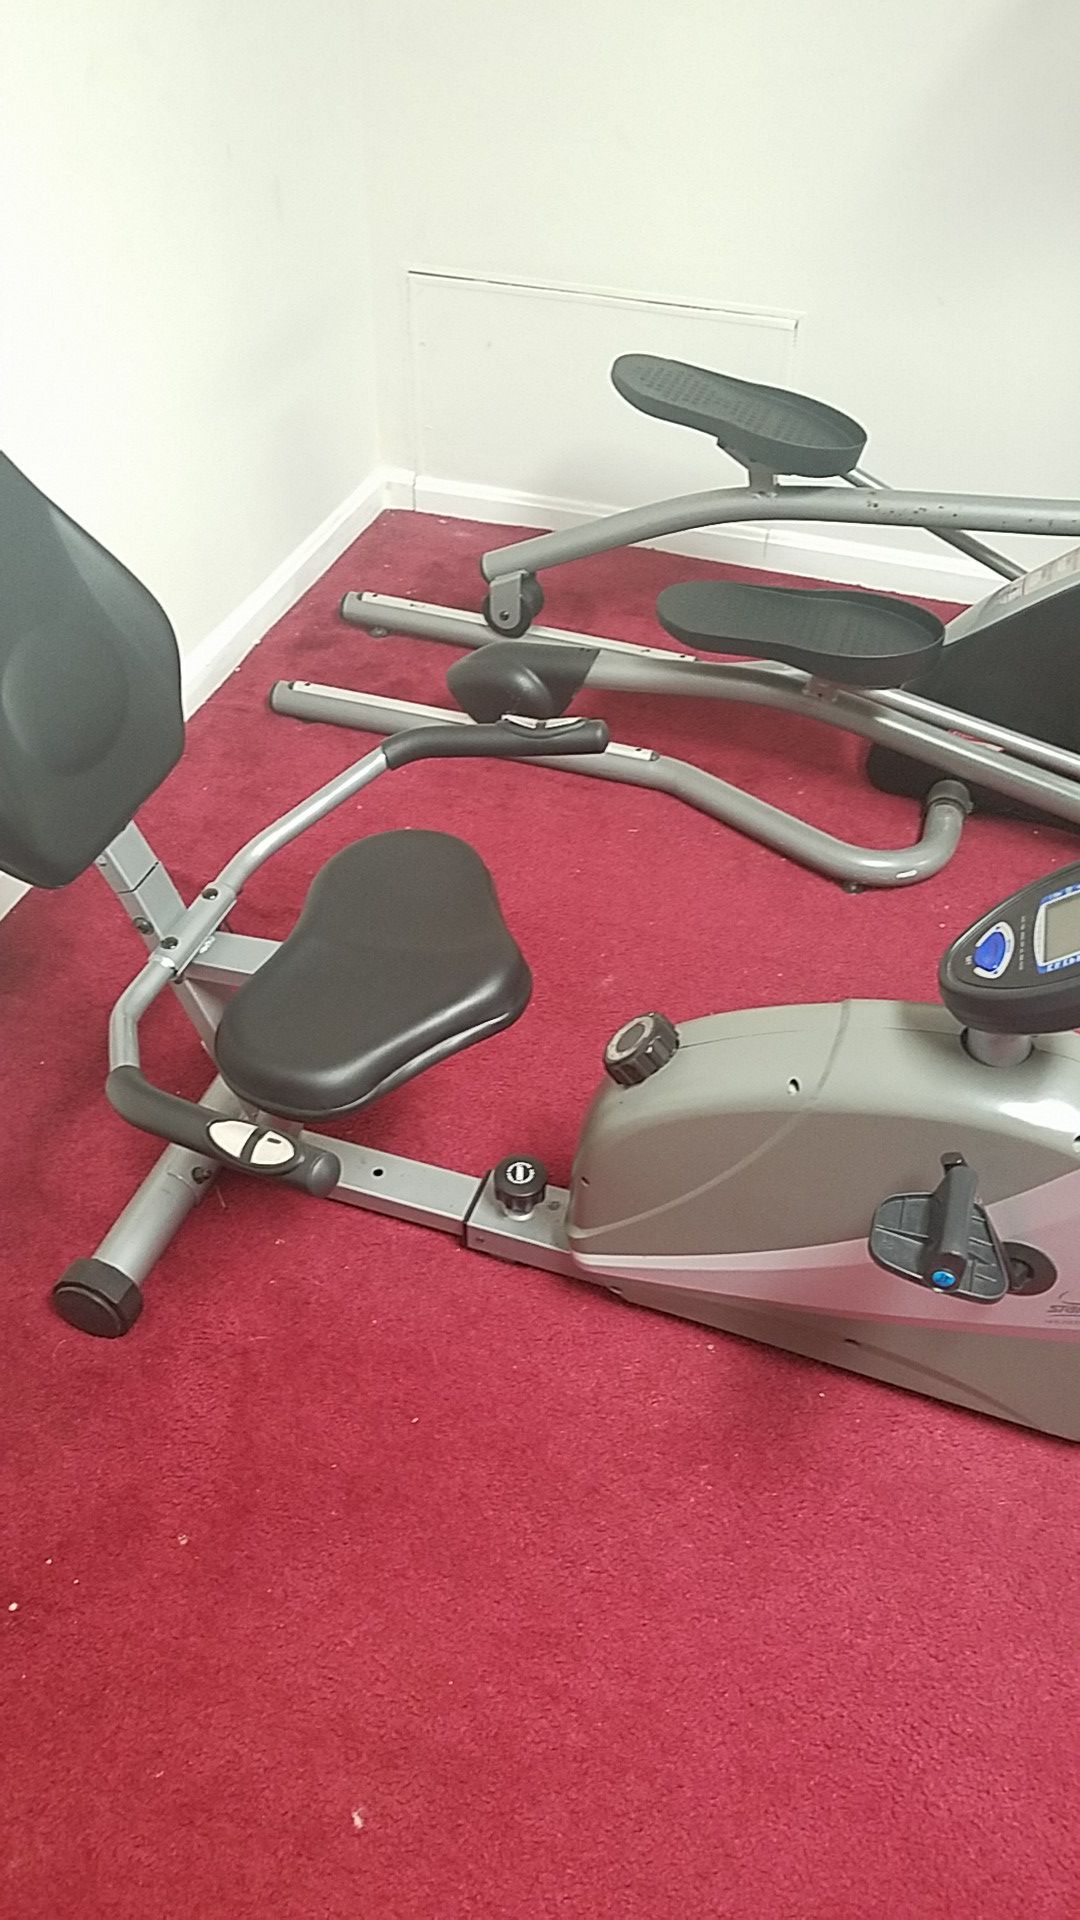 Exercise bike good condition does work